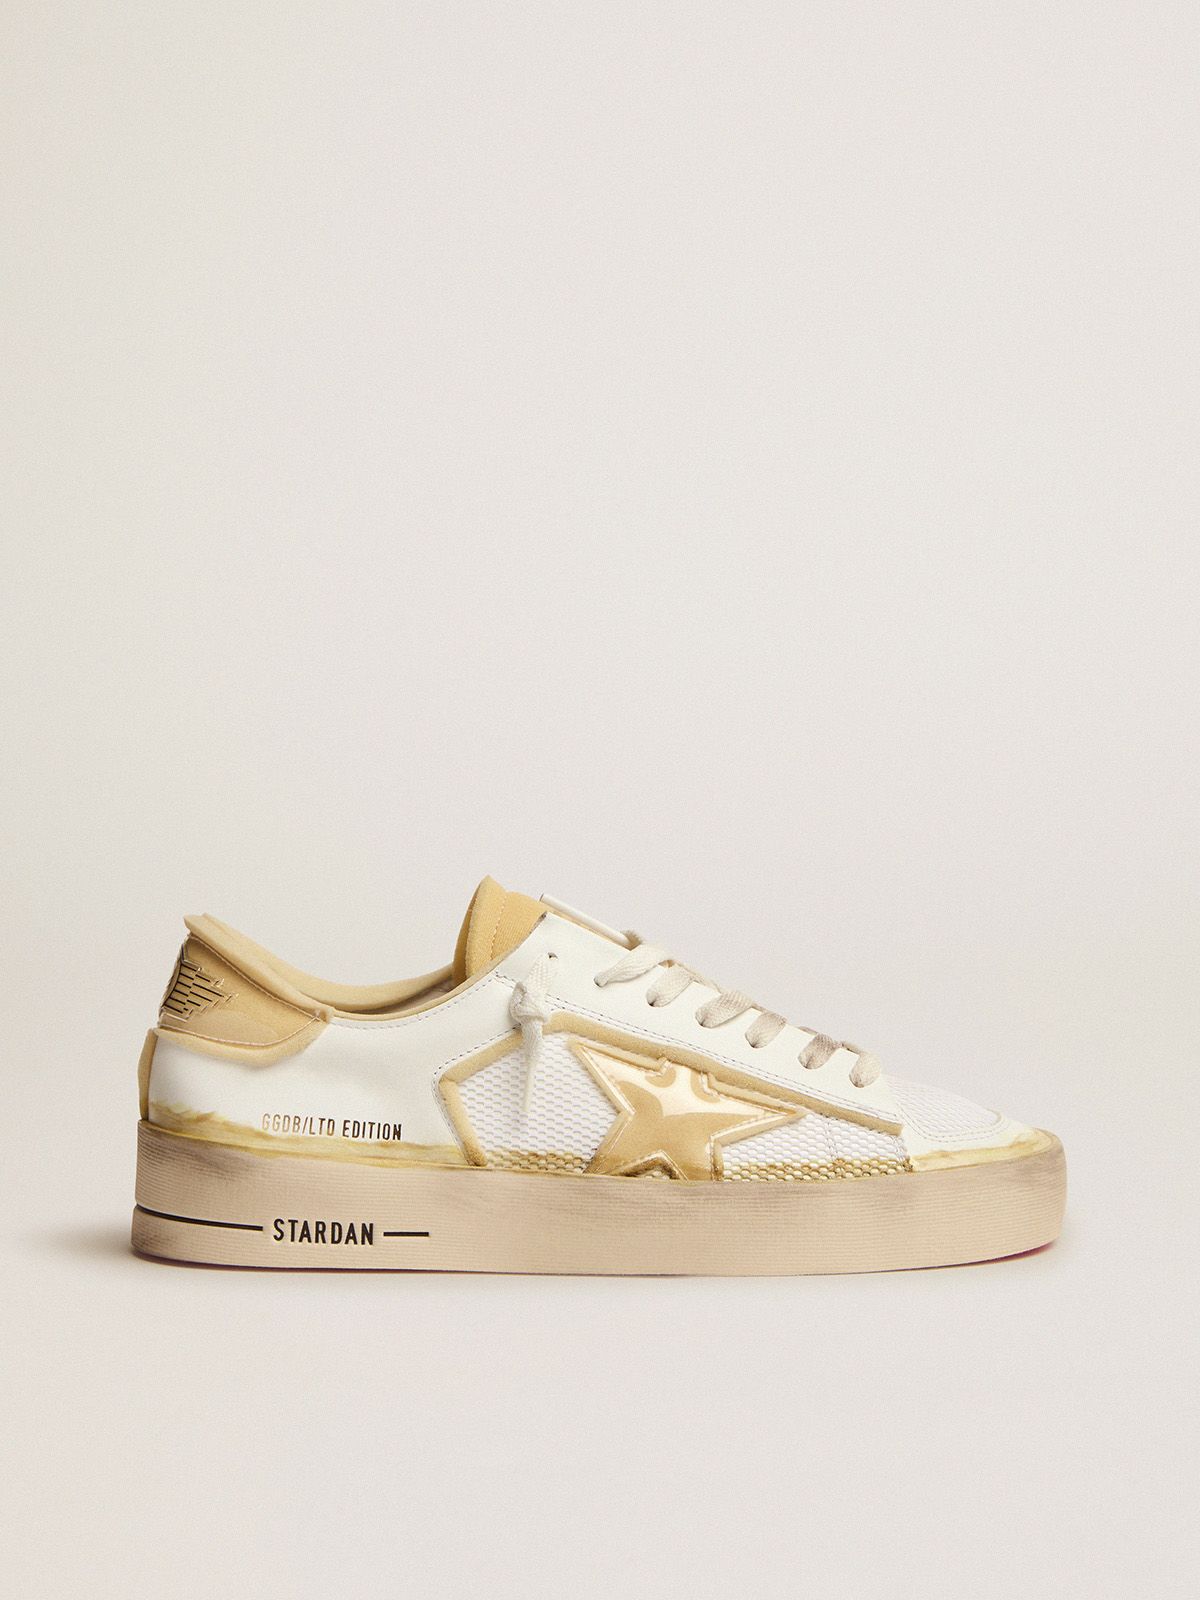 golden goose white and LAB PVC in foam inserts sneakers Stardan leather with